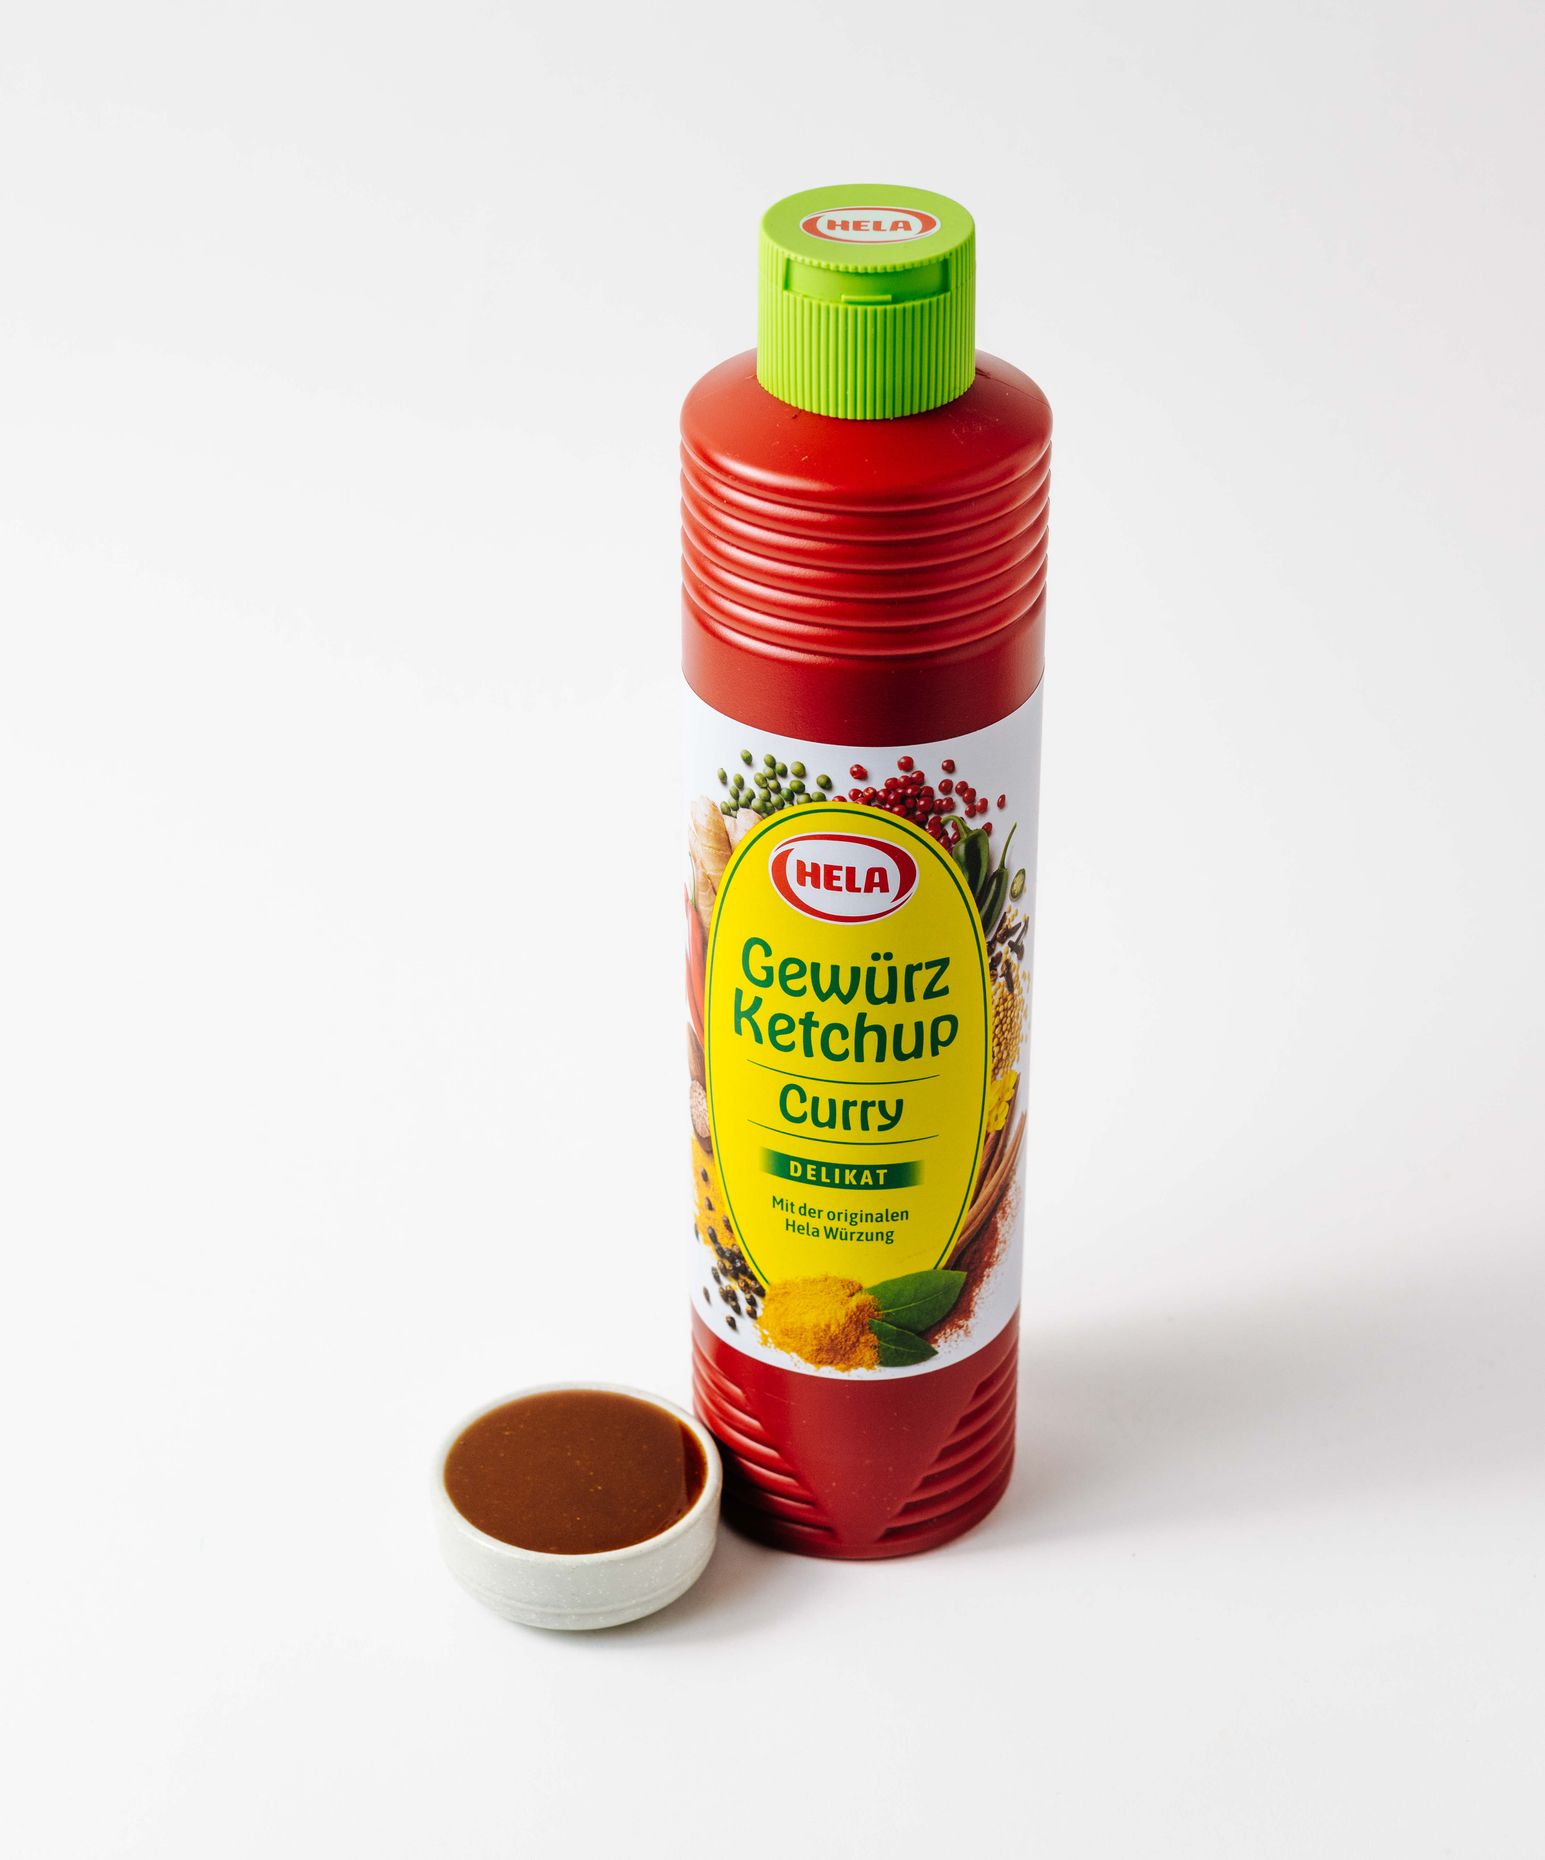 Hela Delicate Curry Ketchup